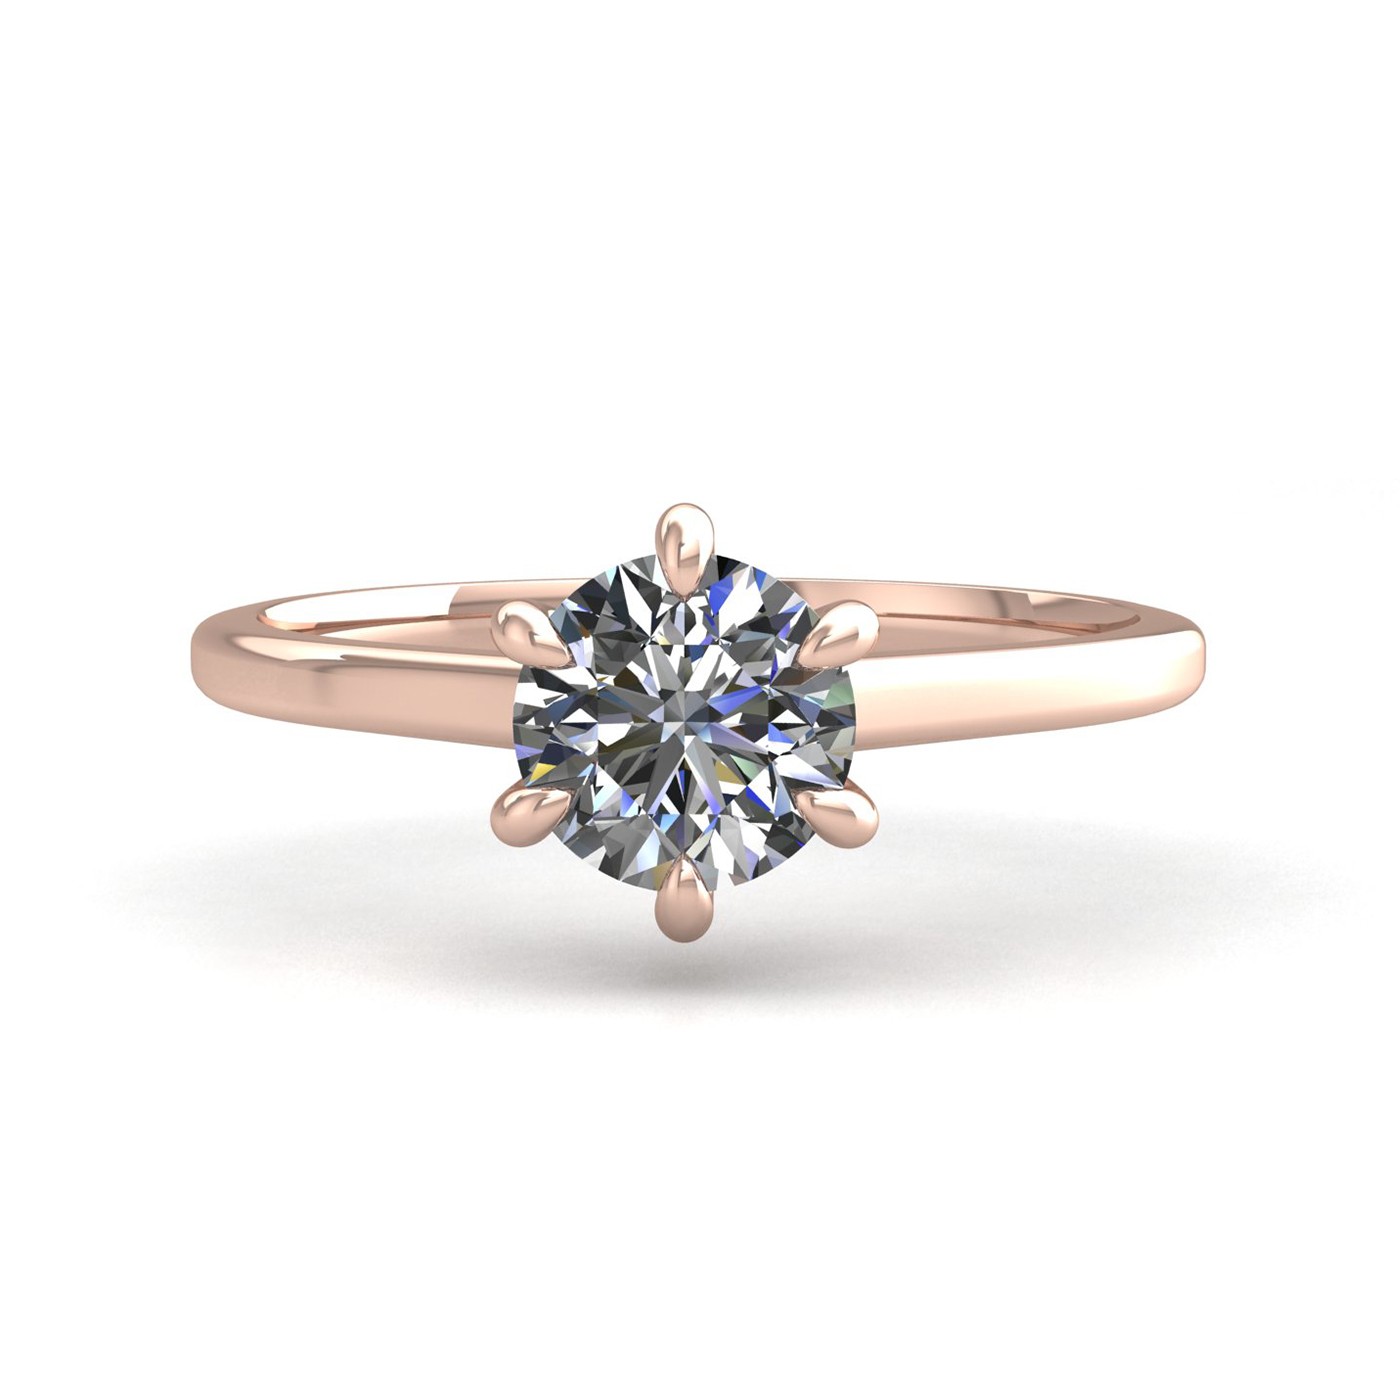 18k rose gold 0,80 ct 6 prongs solitaire round cut diamond engagement ring with whisper thin band